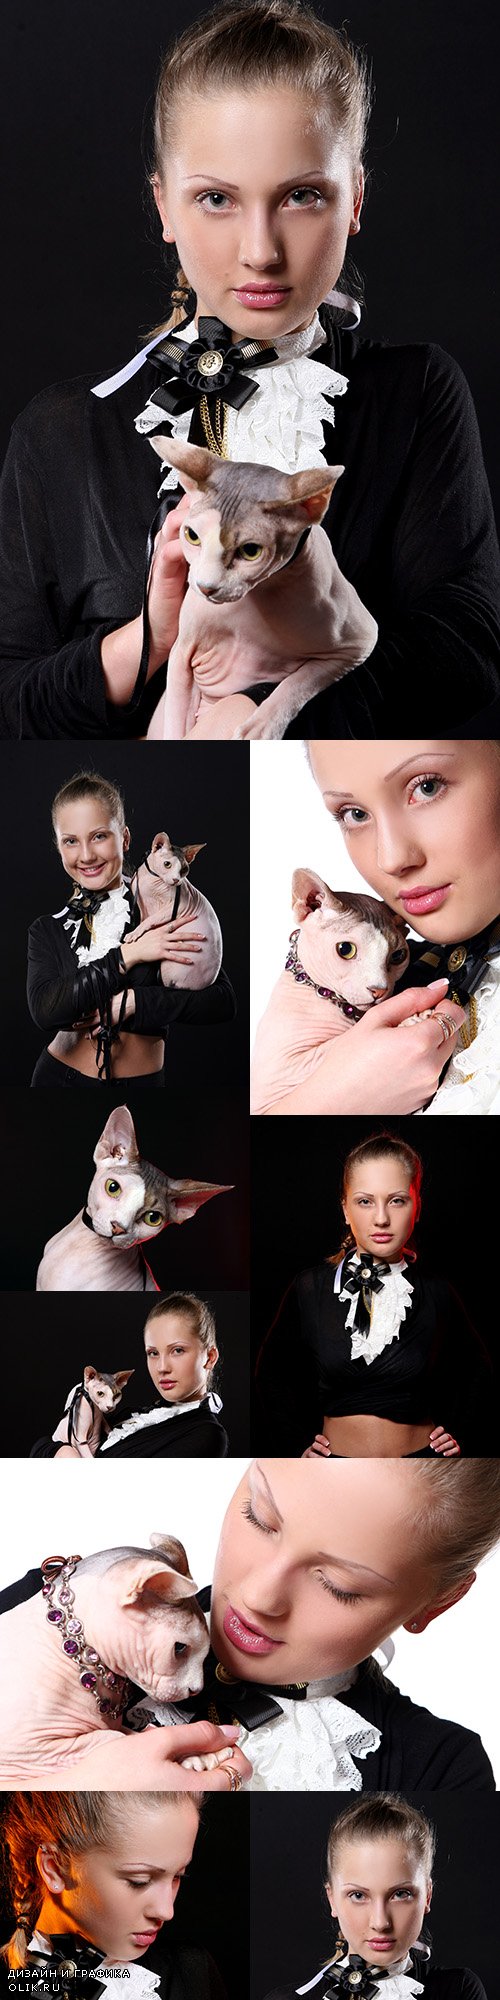 Attractive young girl with cat on her hands